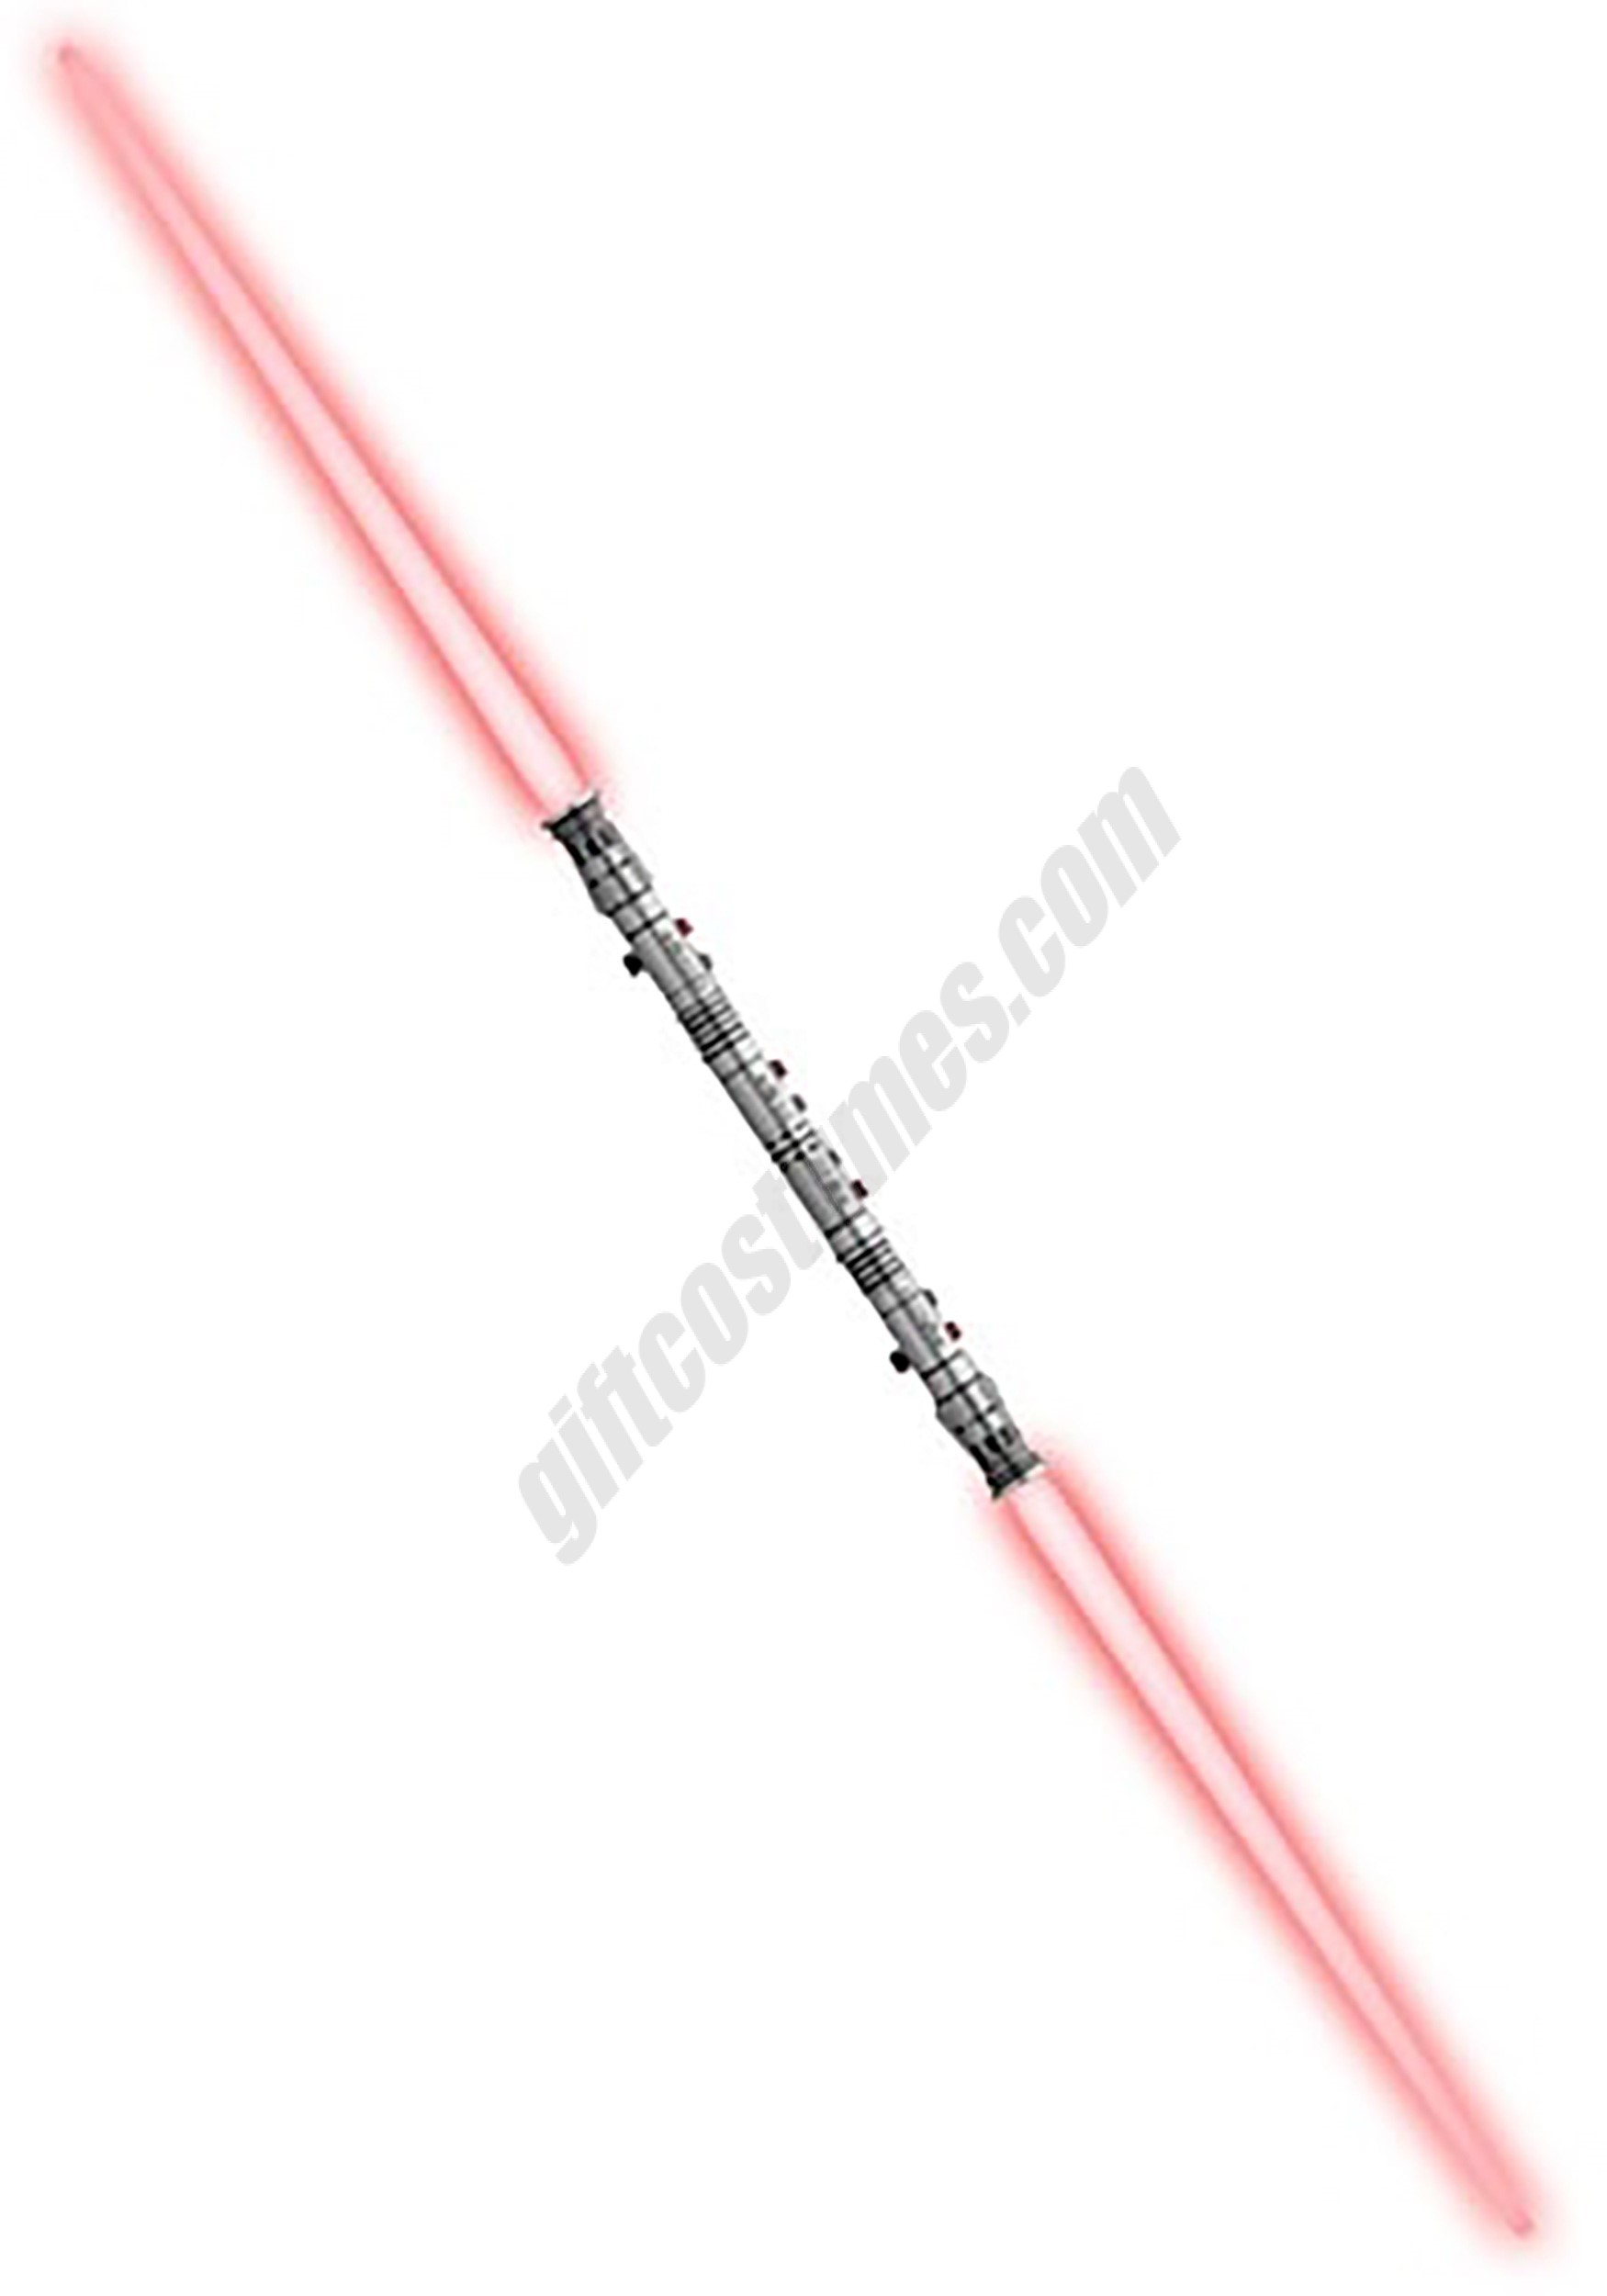 Double-Blade Darth Maul Lightsaber Promotions - Double-Blade Darth Maul Lightsaber Promotions